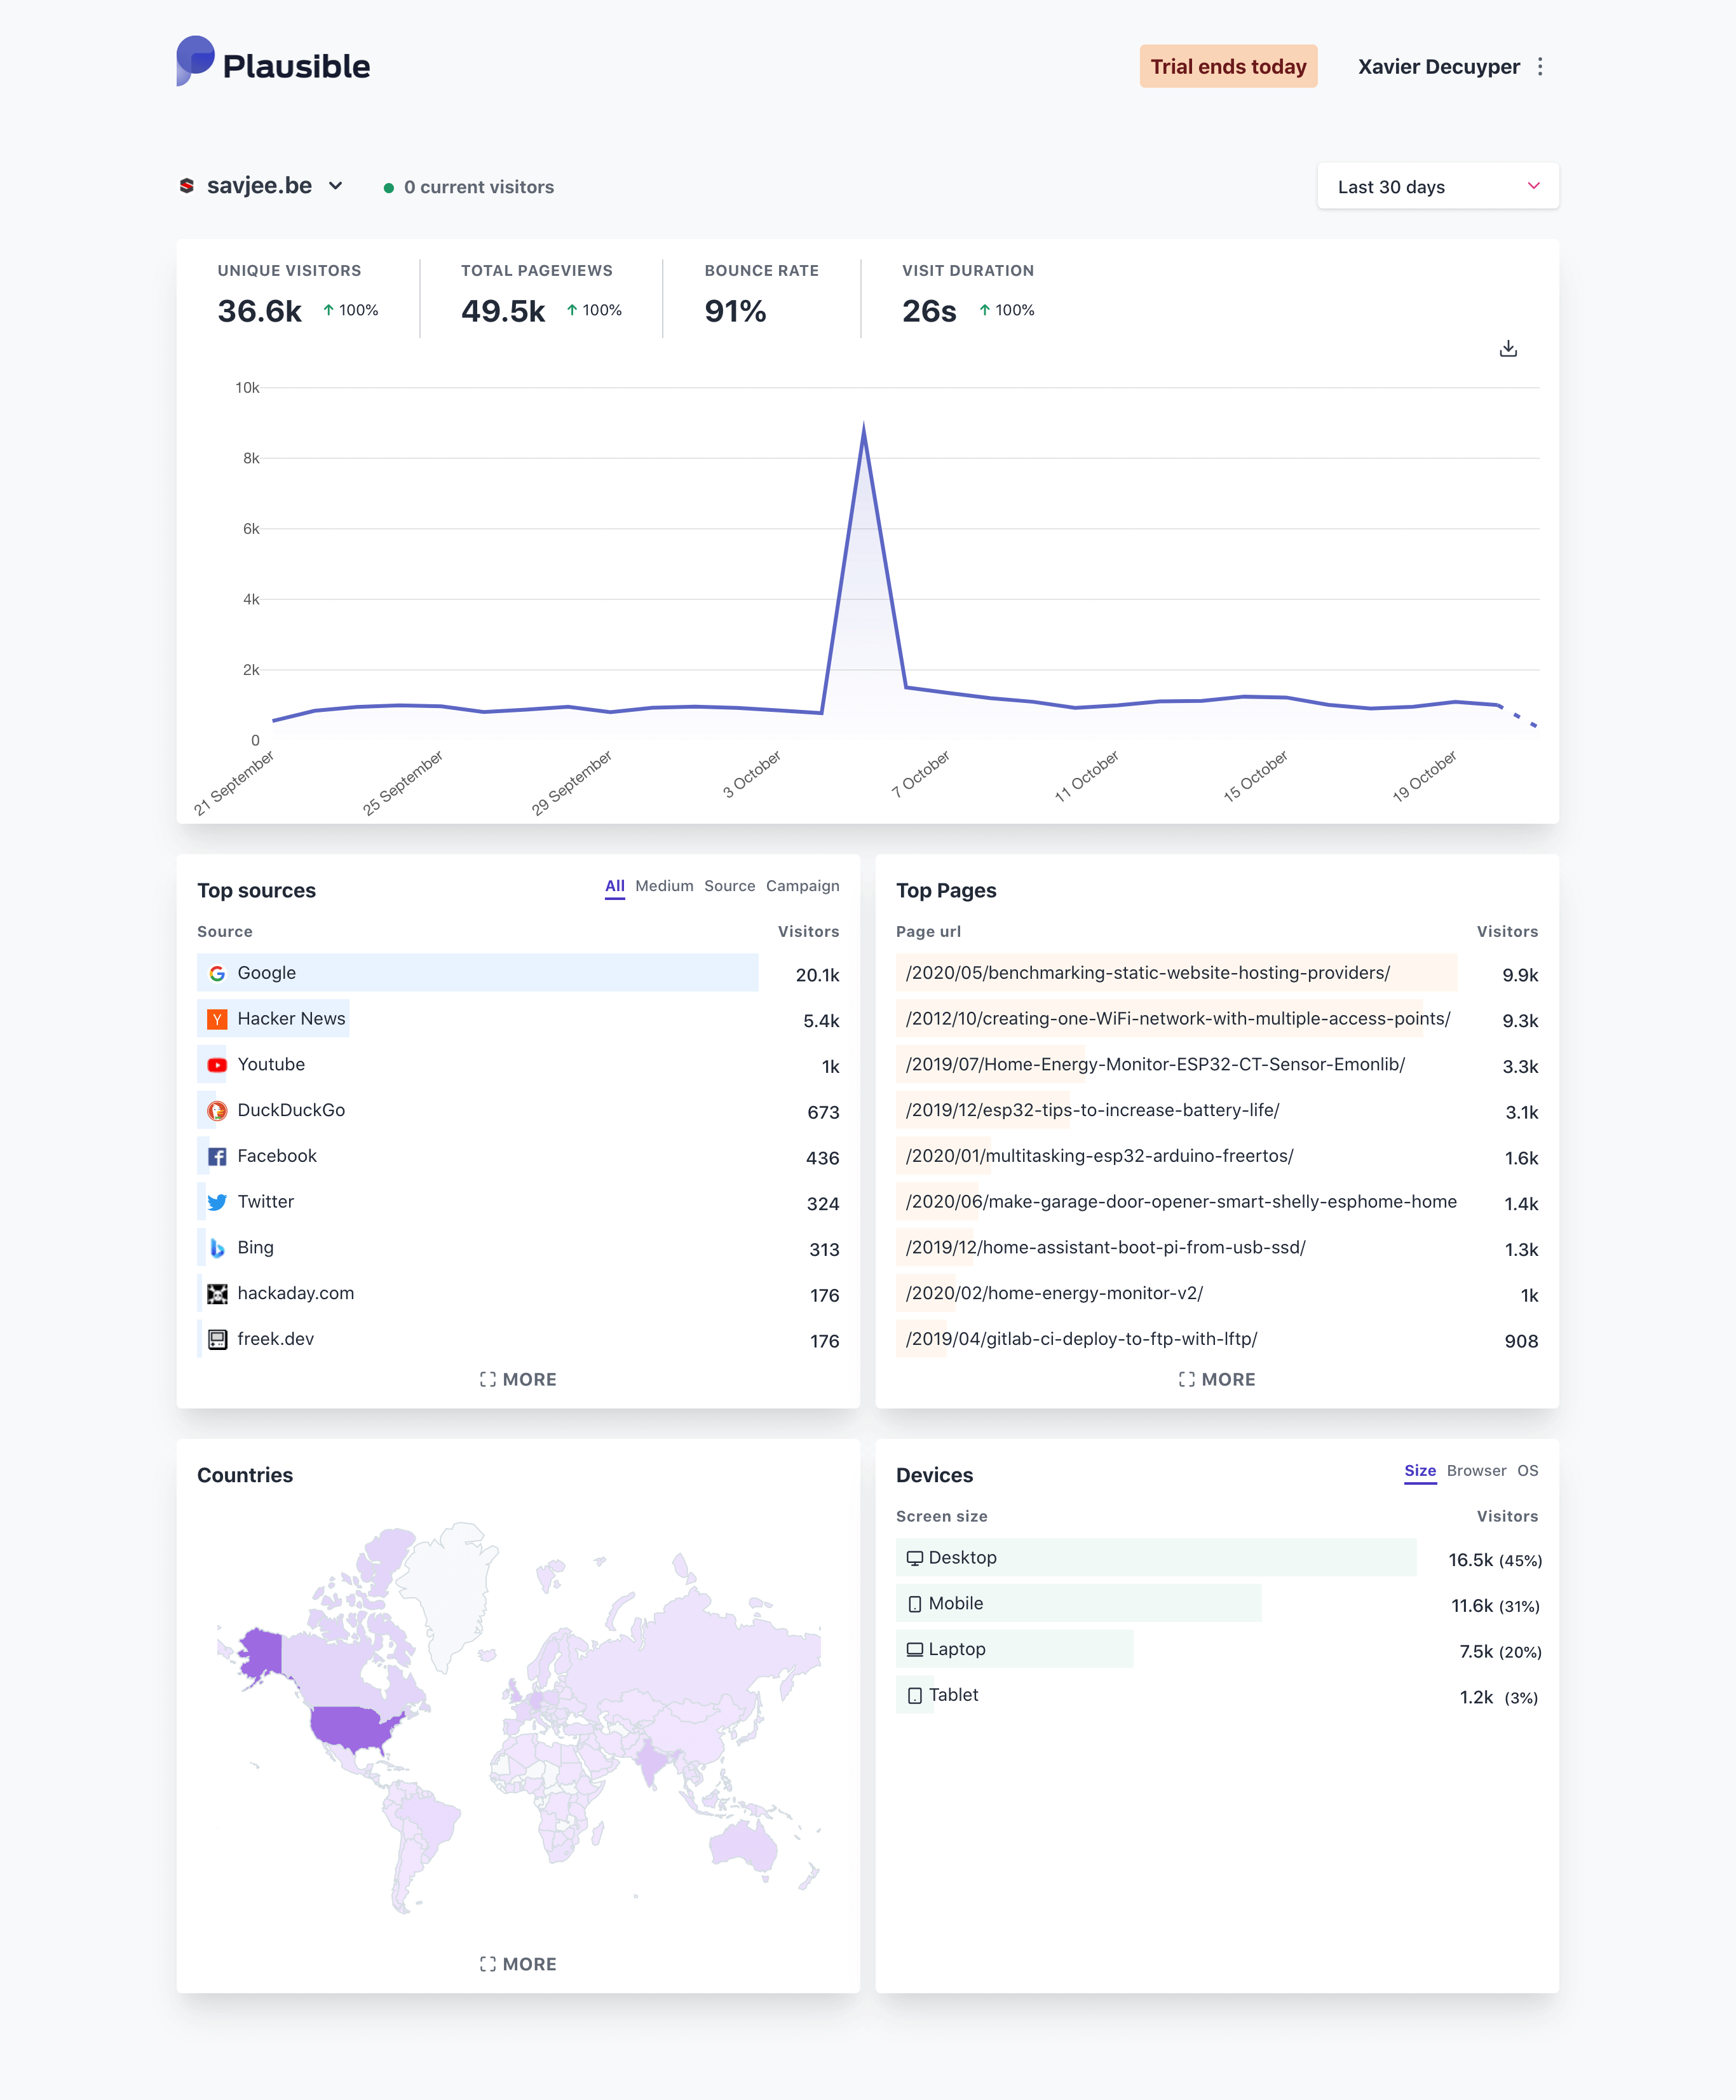 Plausible's dashboard